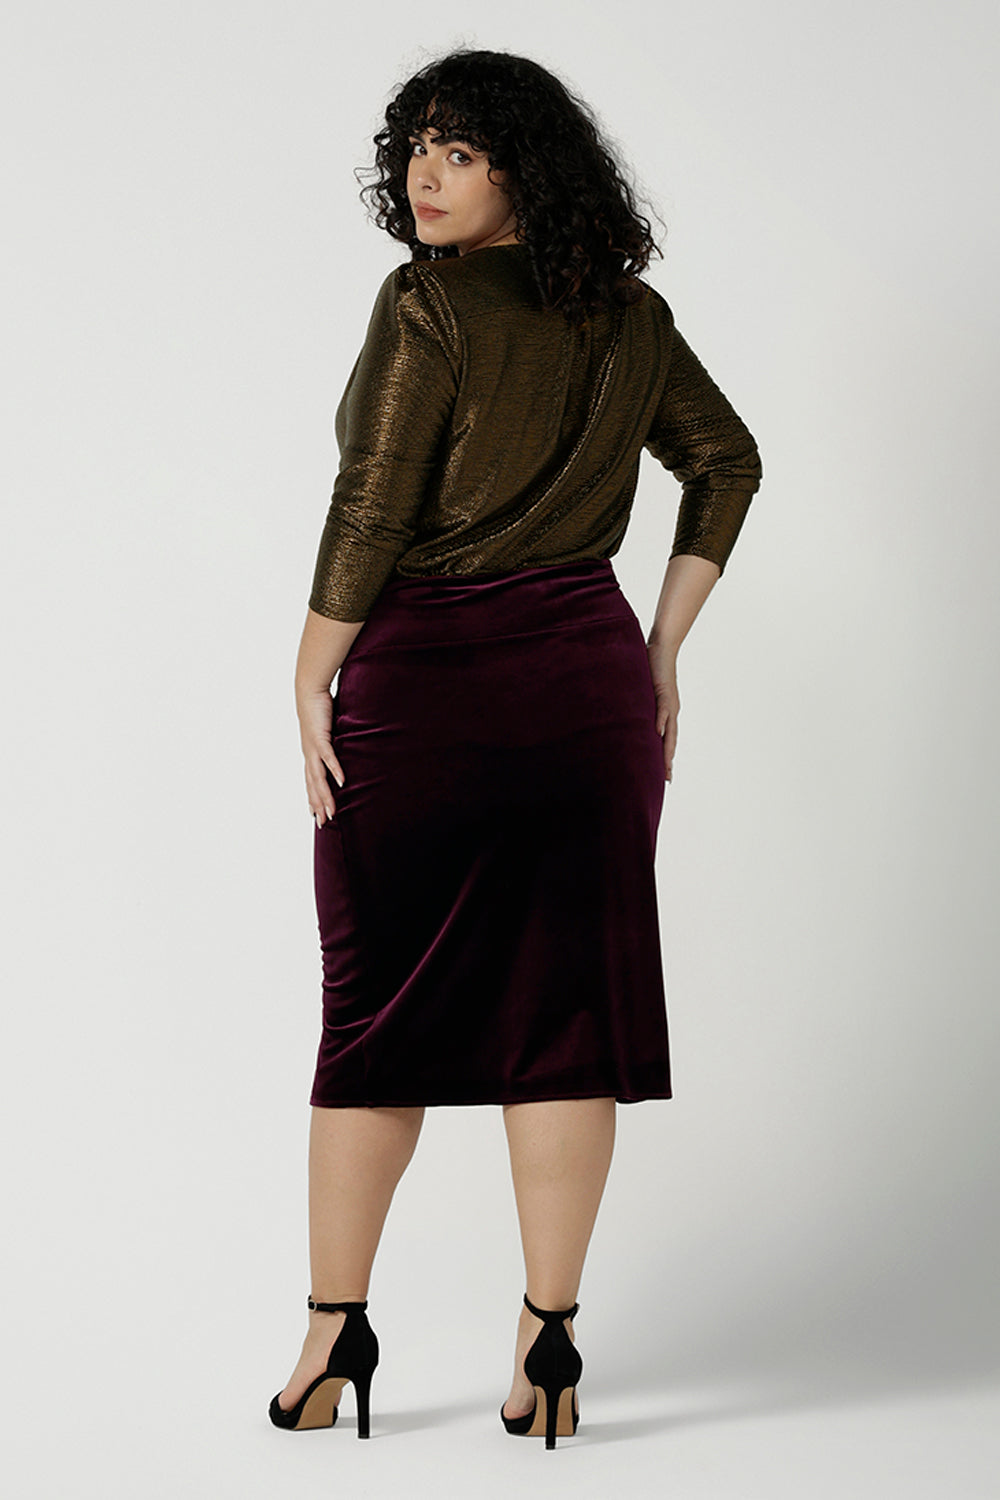 Back view of a s size 18 woA size 18 woman wears the Brooke velour skirt in Wine Velour. A fitted tube skirt in velour knee length. Styled back with Chrissy top in Bullion xanadu. Made in Australia for plus to petite women size 8 - 24.